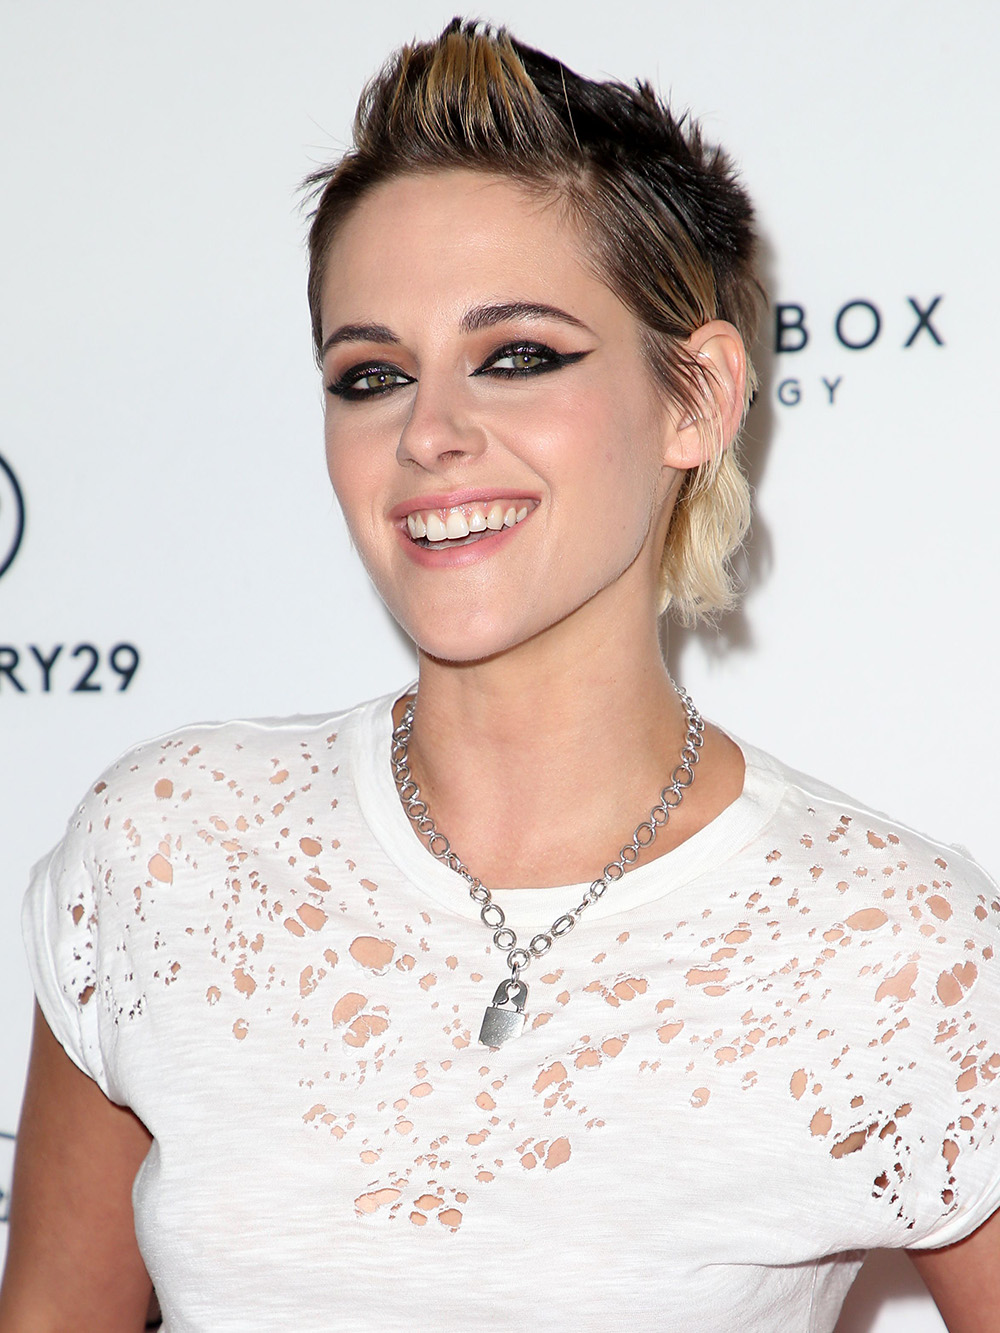 Kristen Stewart at the ‘Come Swim’ film premiere in Los Angeles, CA in 2017. She wore a white outfit and a brown and blonde mullet.